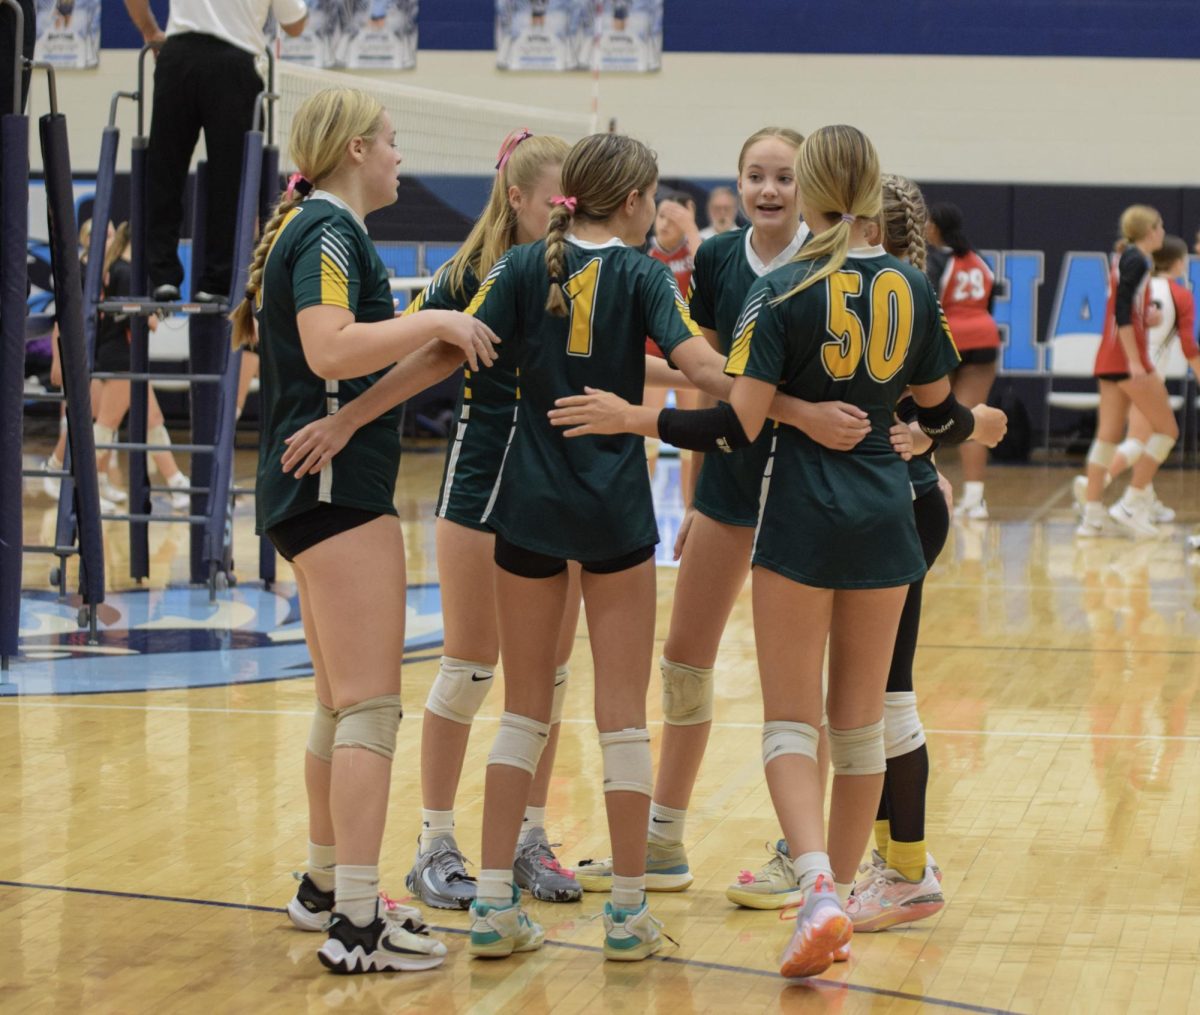 Photos: Freshman Volleyball Competes at Jefferson Volleyball Invite on September 23